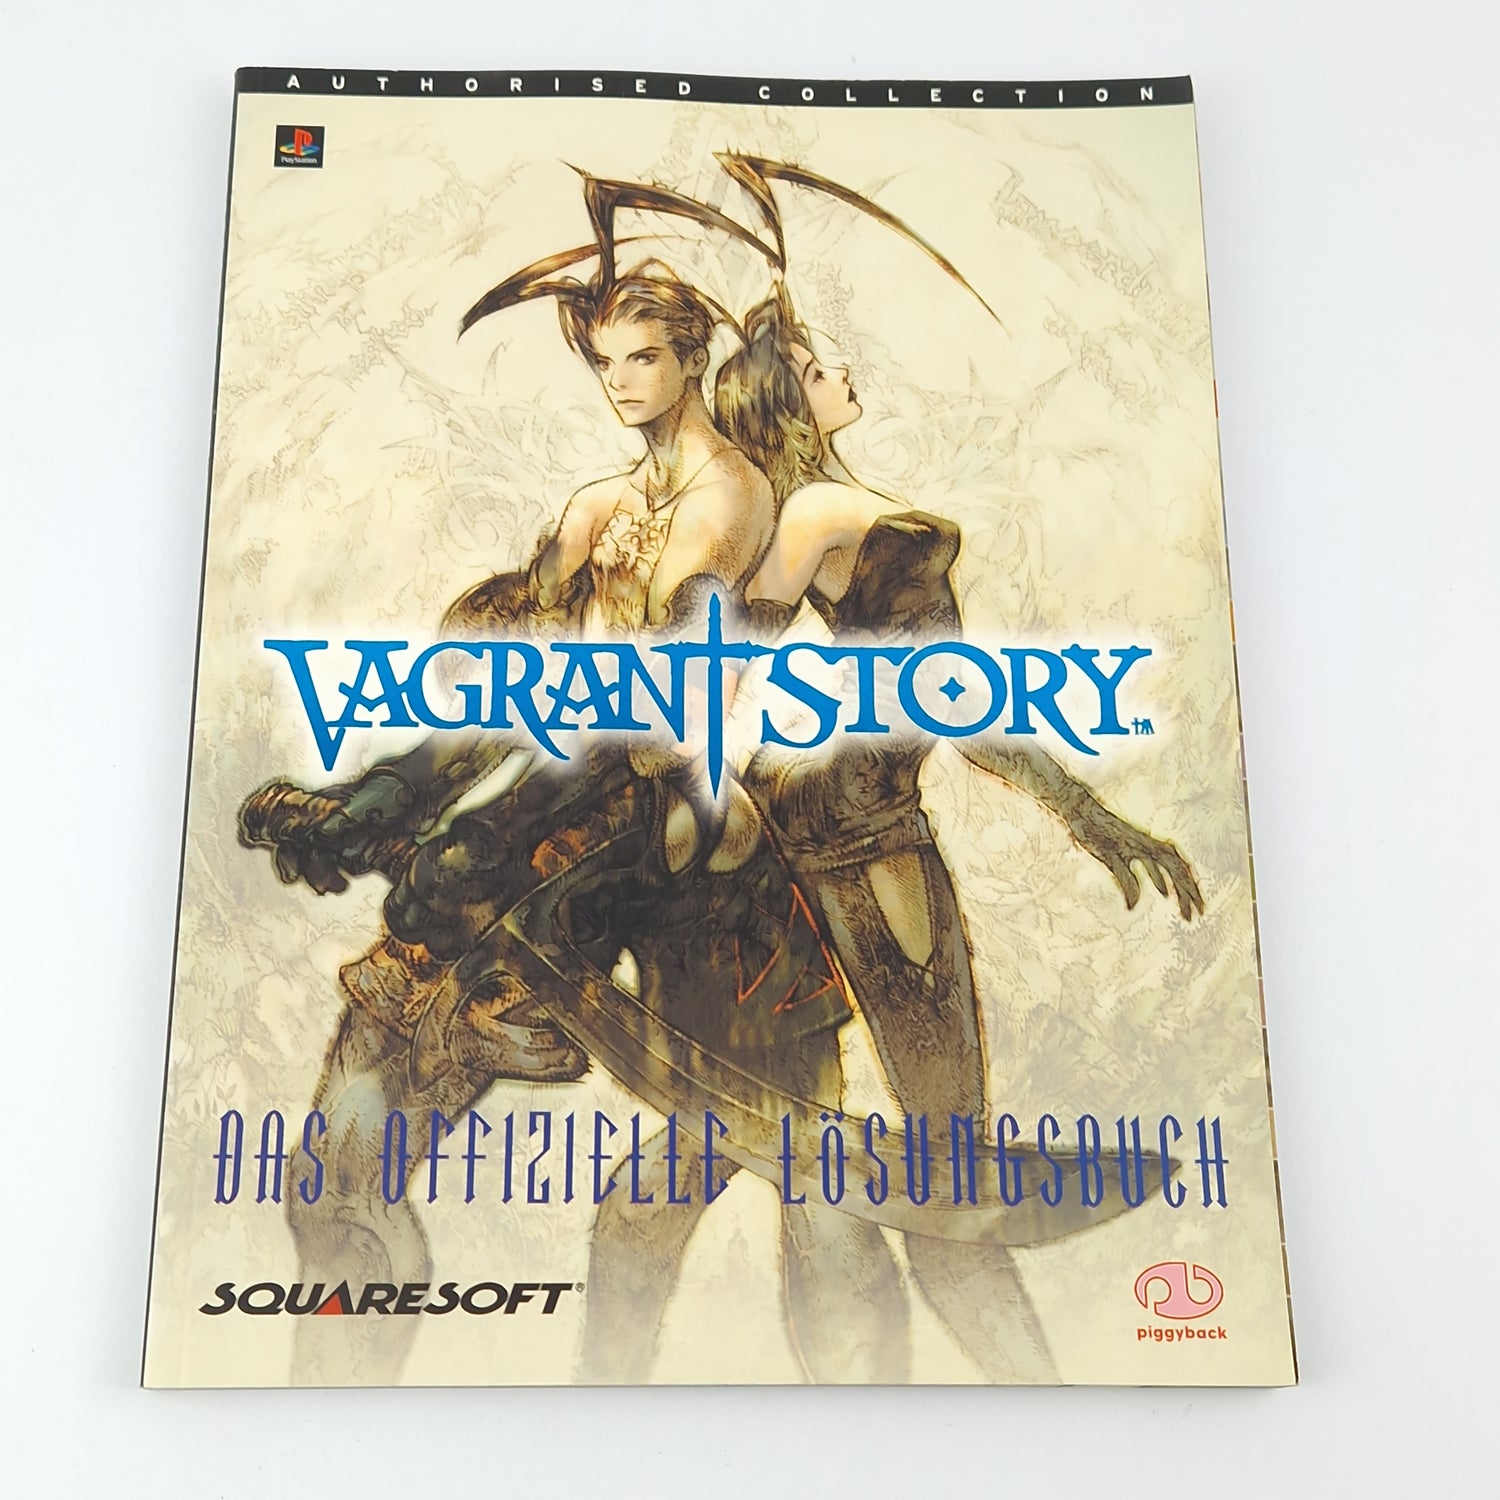 Playstation 1 game: Vagrant Story - CD + instructions with solution book guide PS1